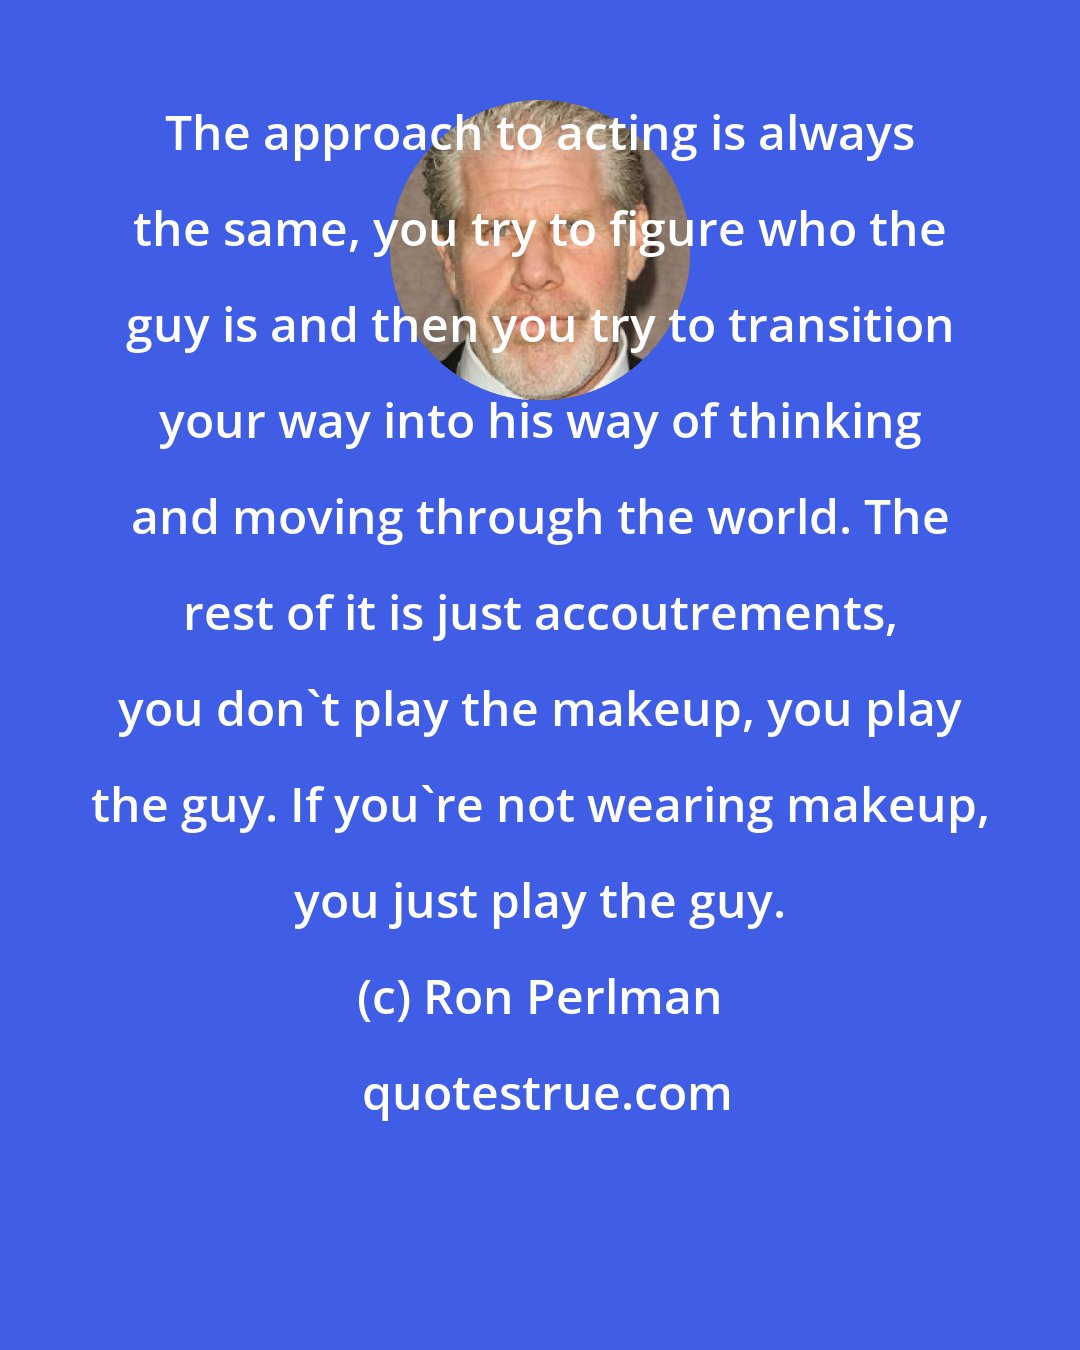 Ron Perlman: The approach to acting is always the same, you try to figure who the guy is and then you try to transition your way into his way of thinking and moving through the world. The rest of it is just accoutrements, you don't play the makeup, you play the guy. If you're not wearing makeup, you just play the guy.